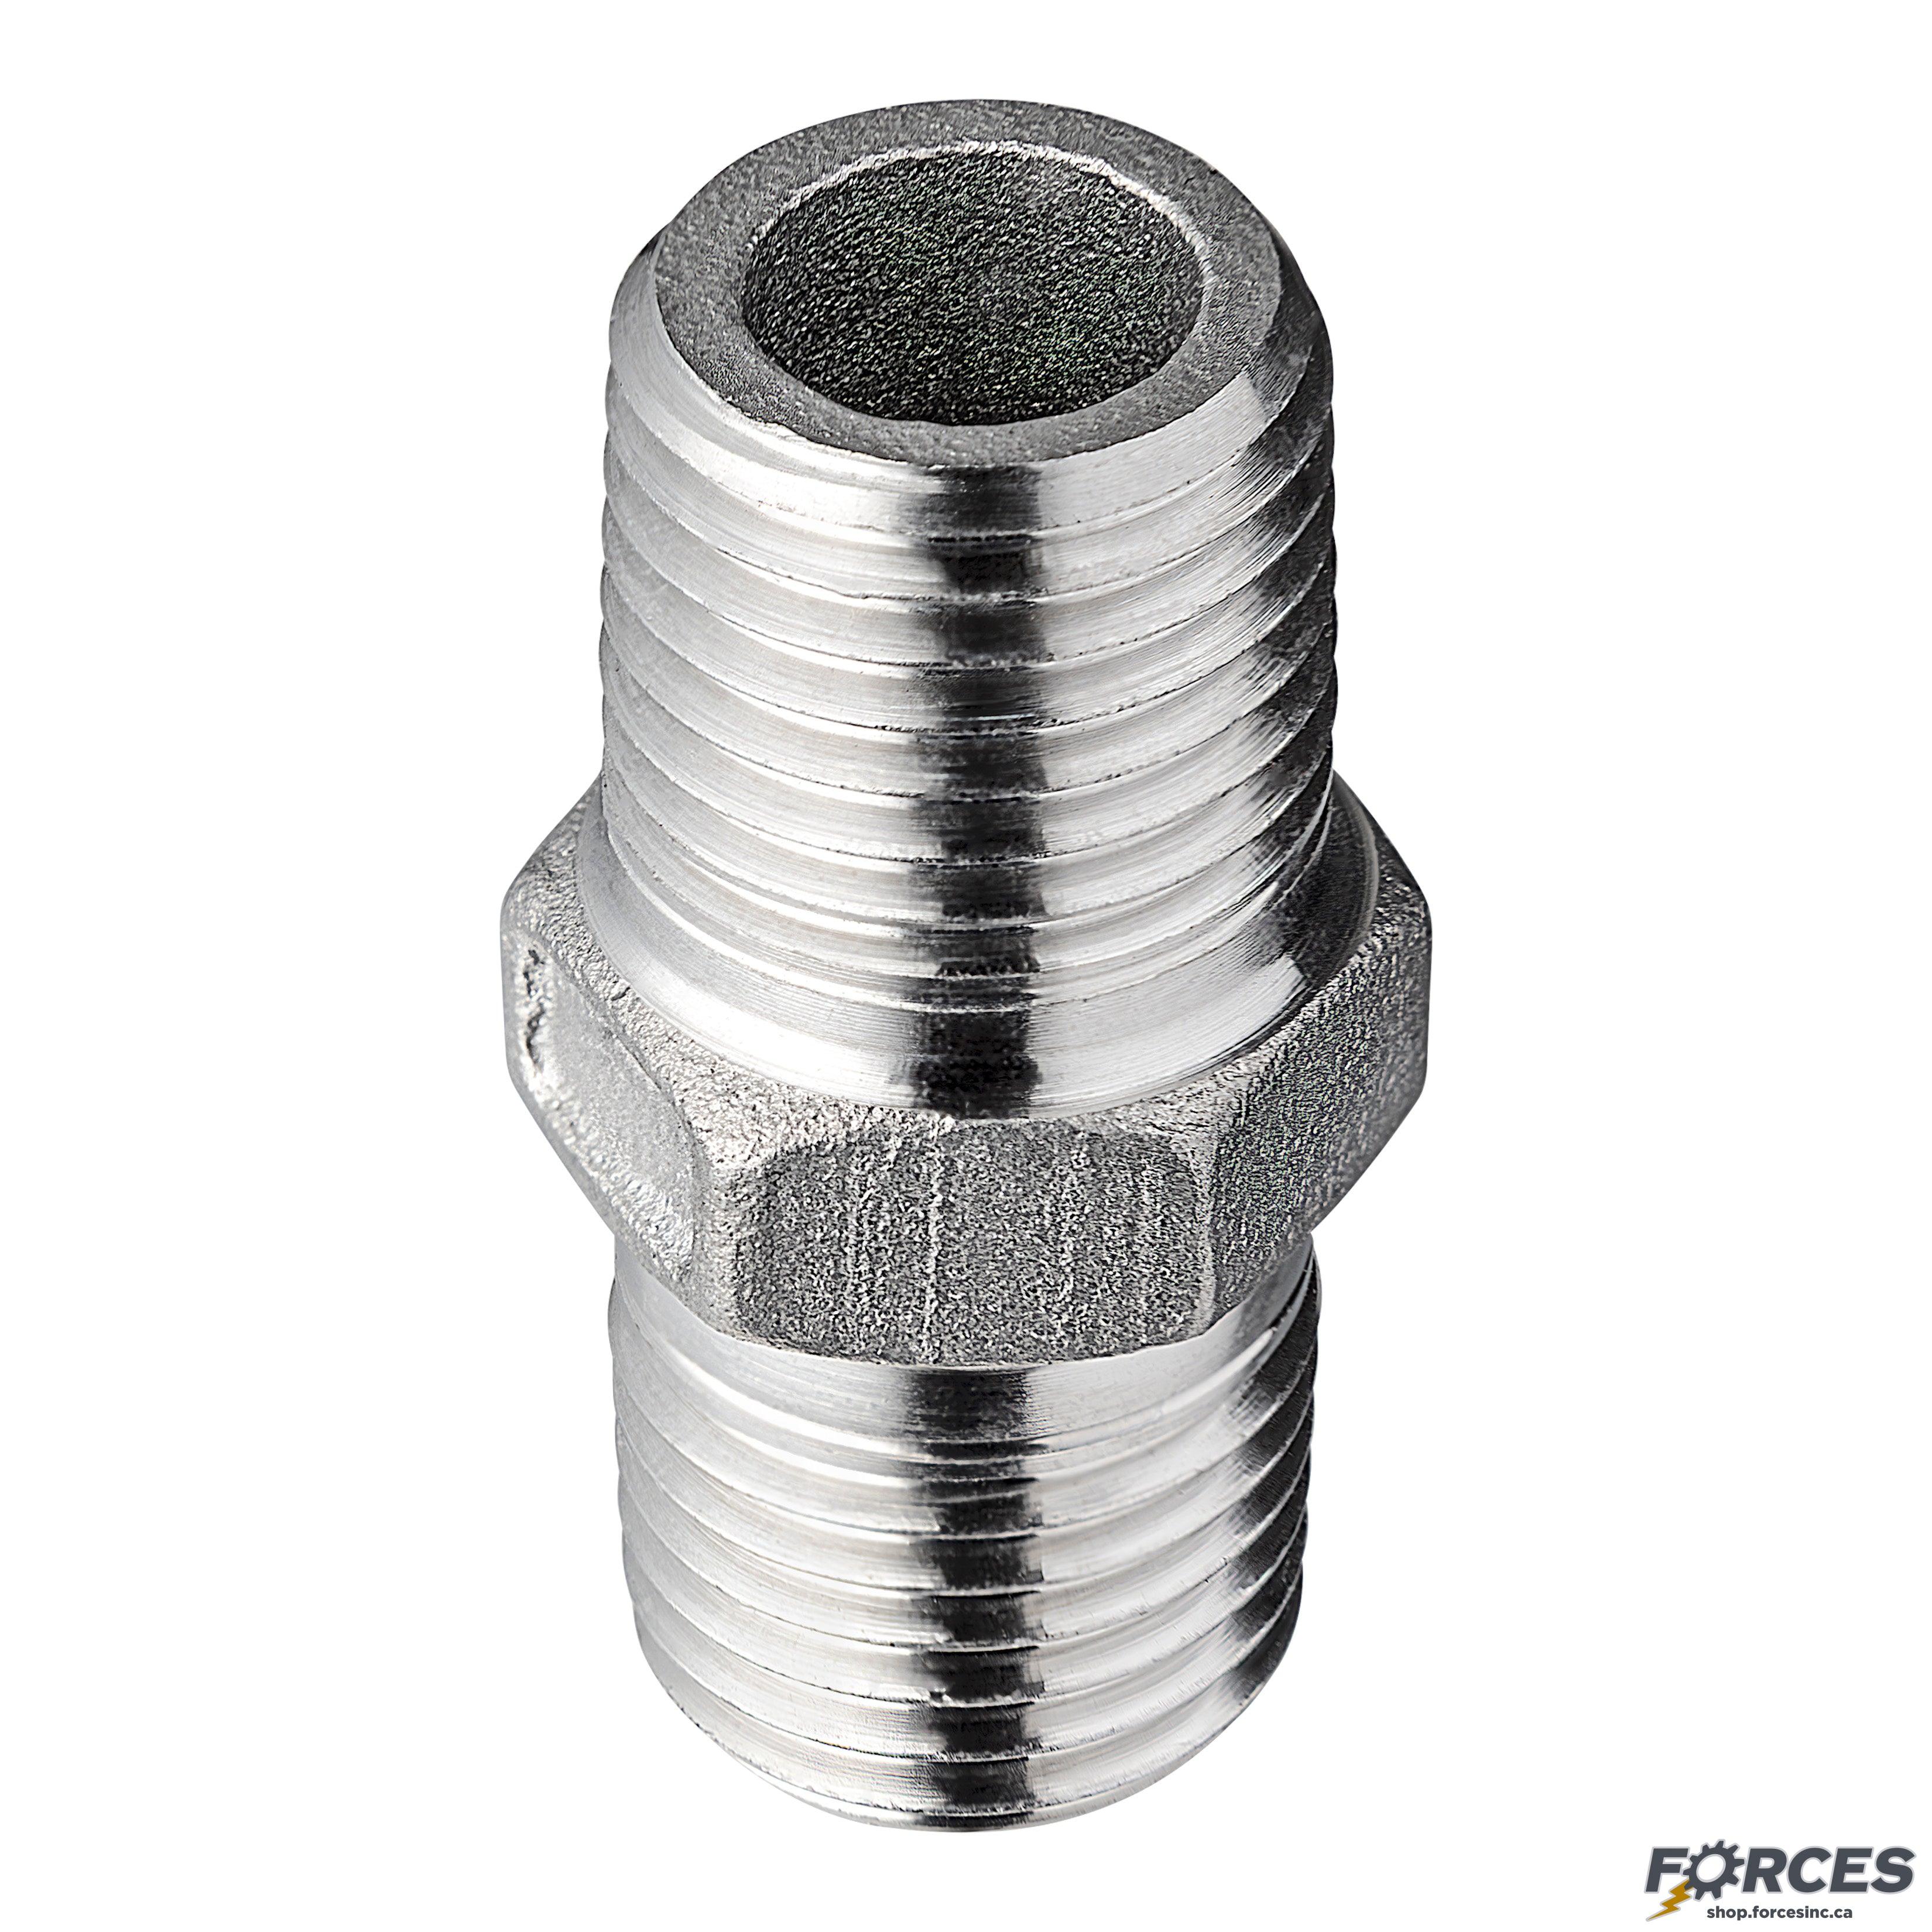 1" Hex Nipple - Stainless Steel 316 - Forces Inc